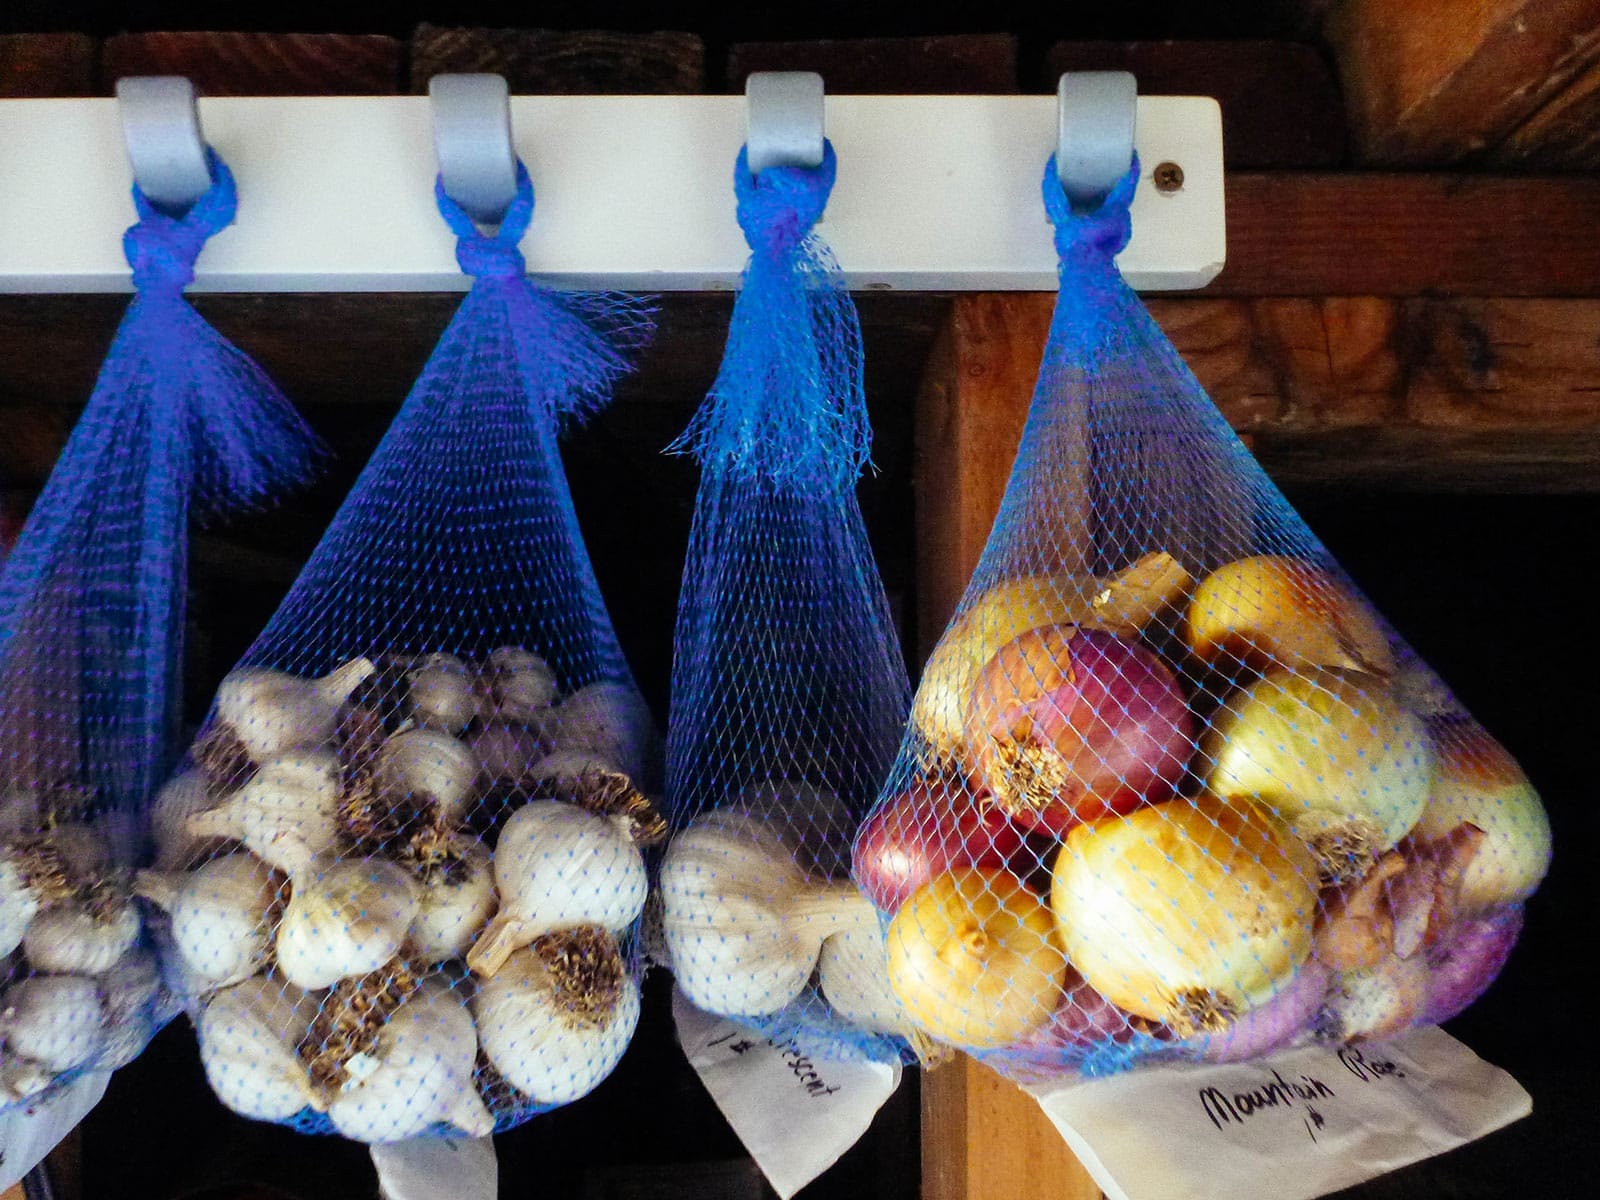 Hanging mesh bags filled with garlic and onions in storage in a basement cellar